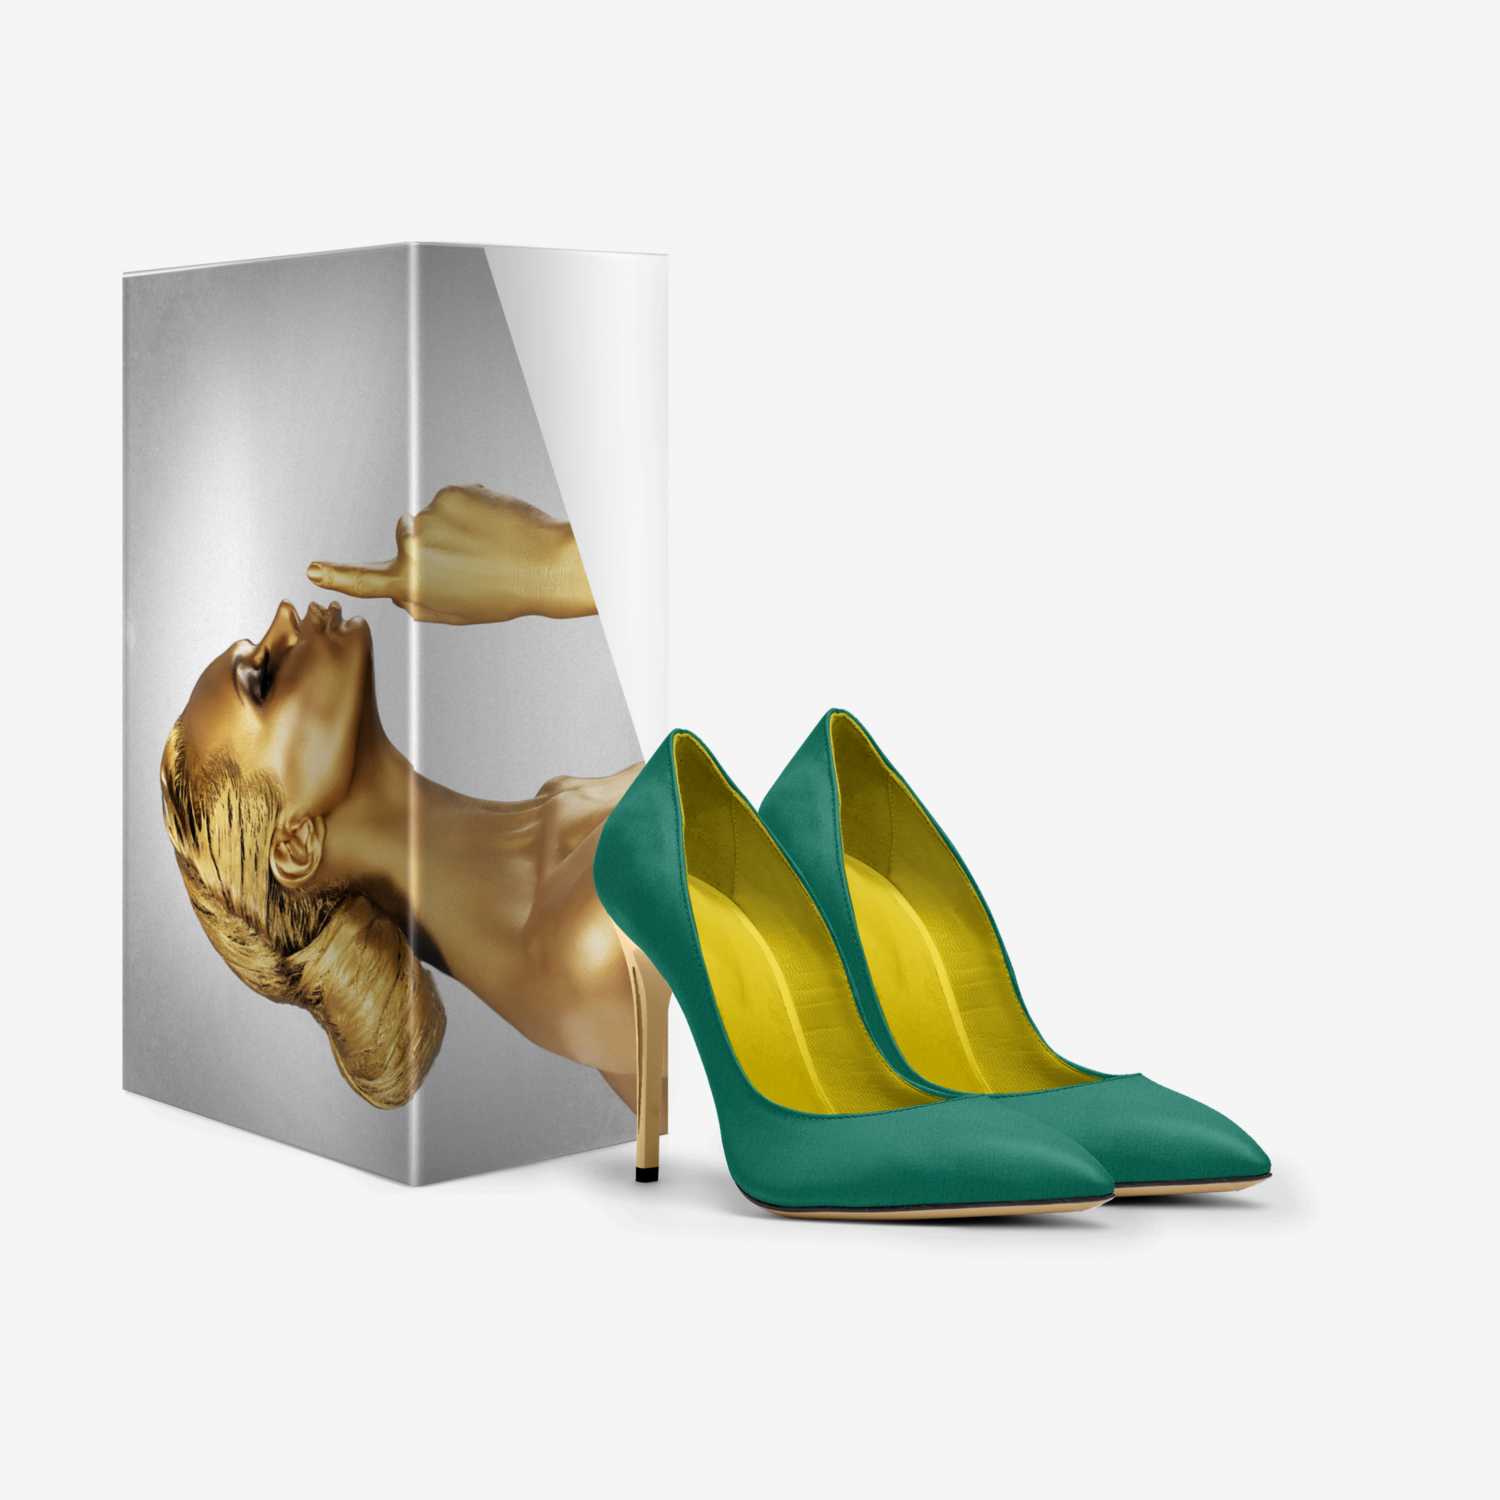 MUSE custom made in Italy shoes by Randi C. Sweet | Box view